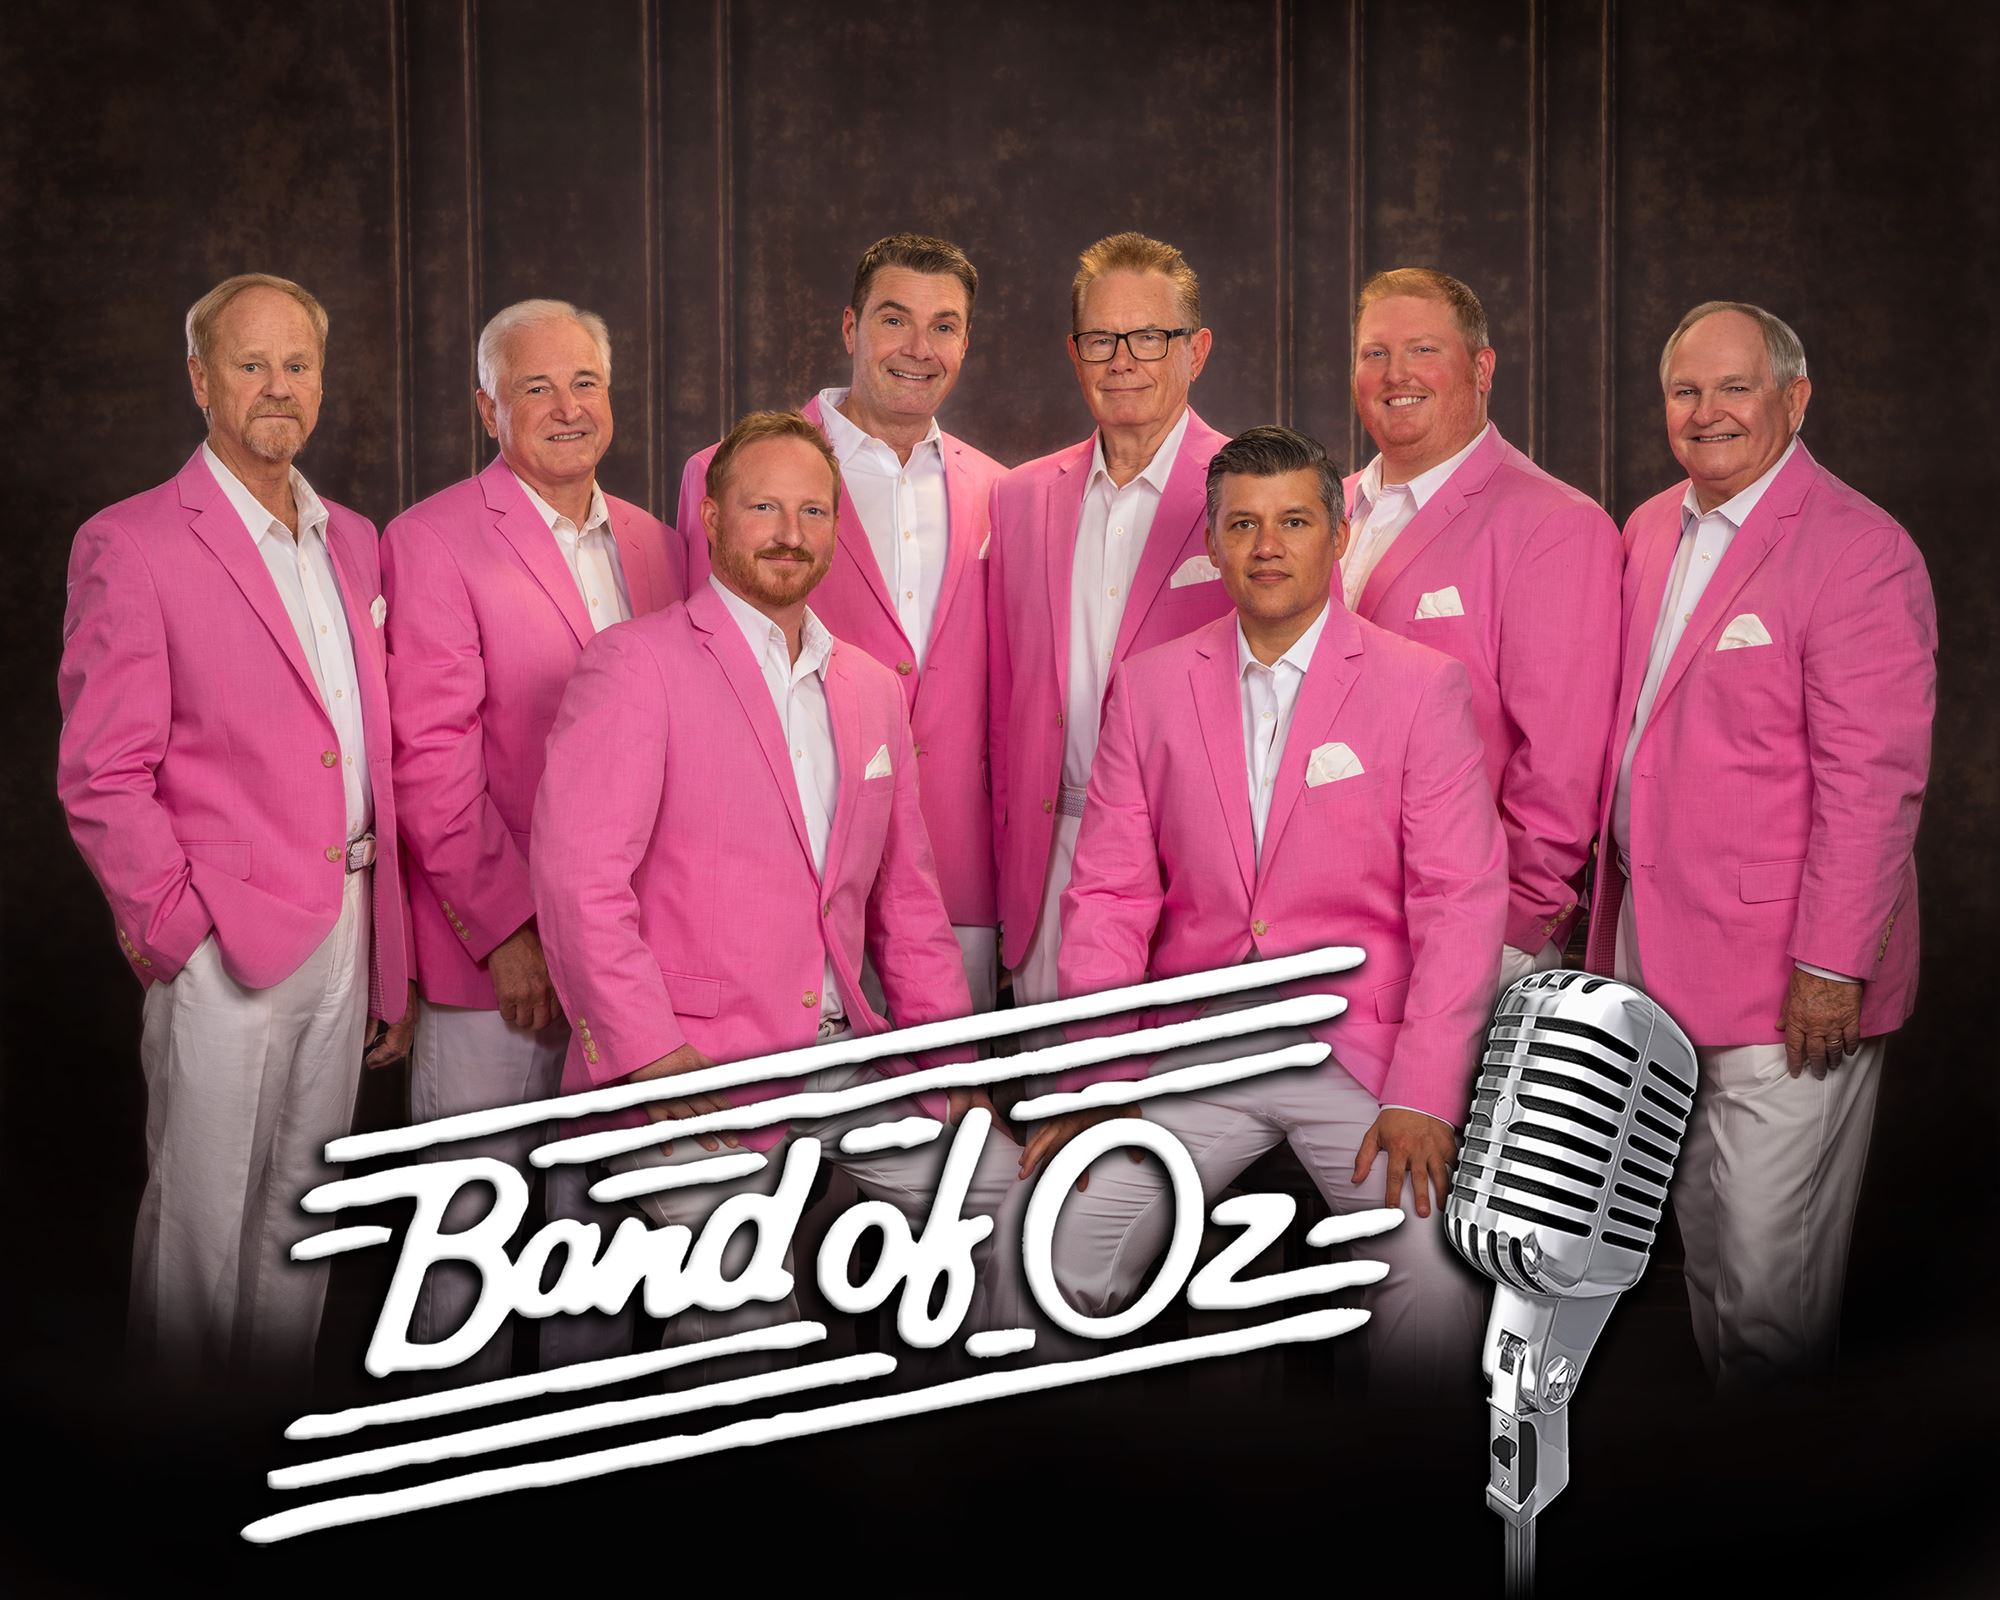 The Band of Oz